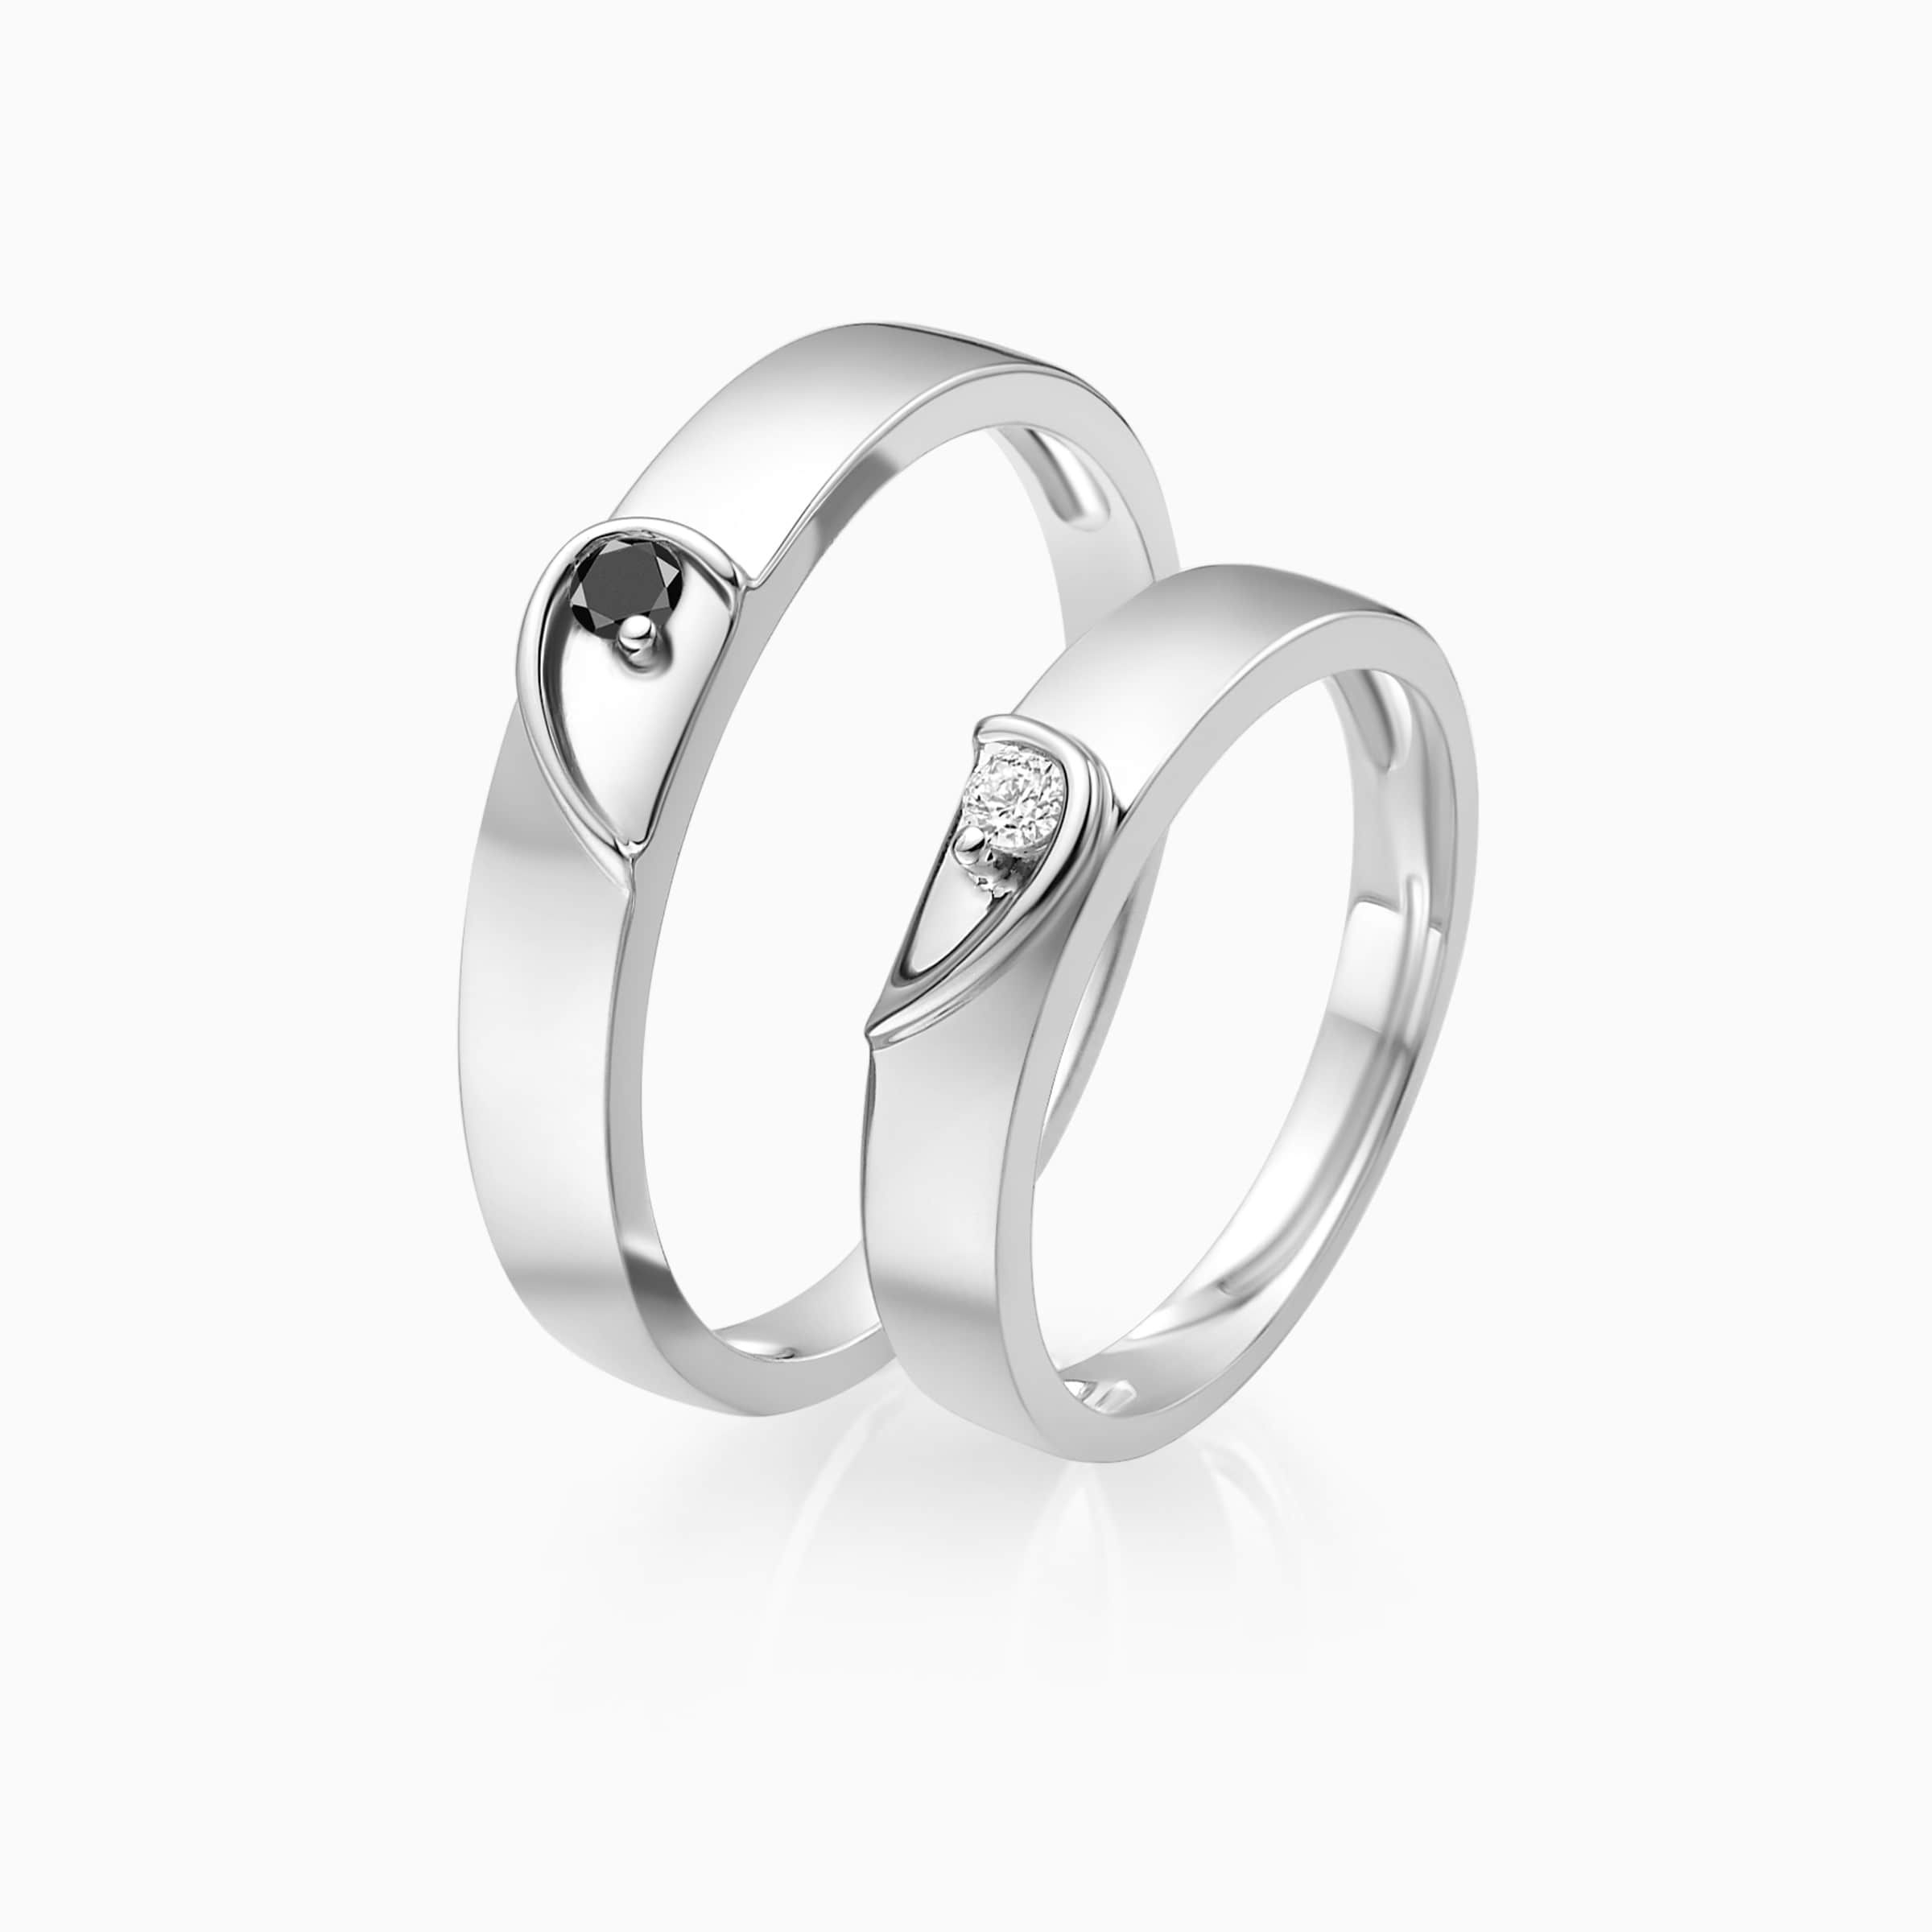 Darry Ring heart wedding rings for couple side view